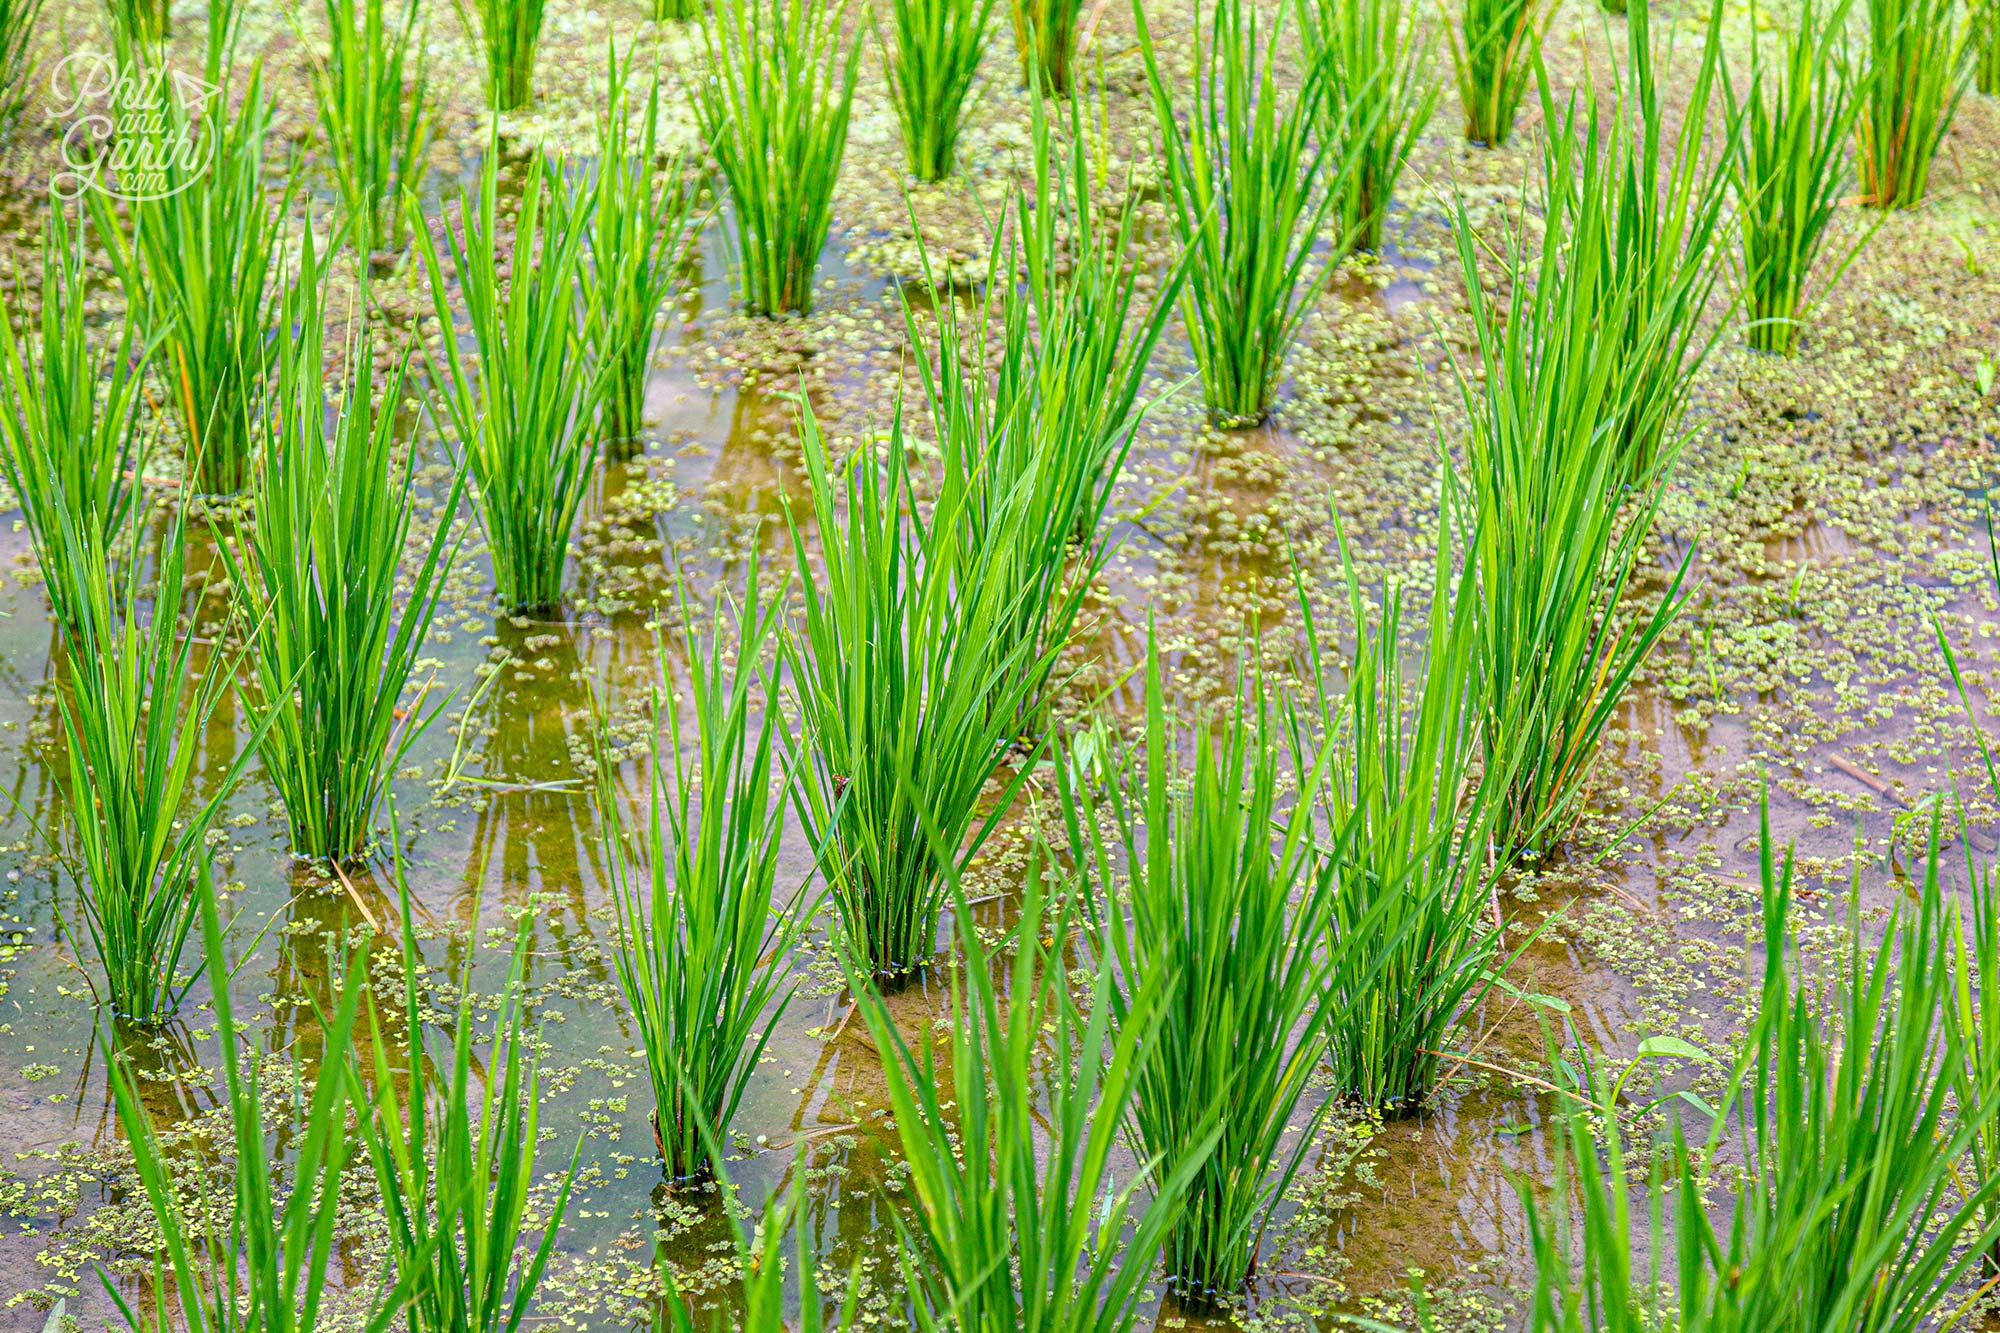 The rice is usually planted in February and harvested in July